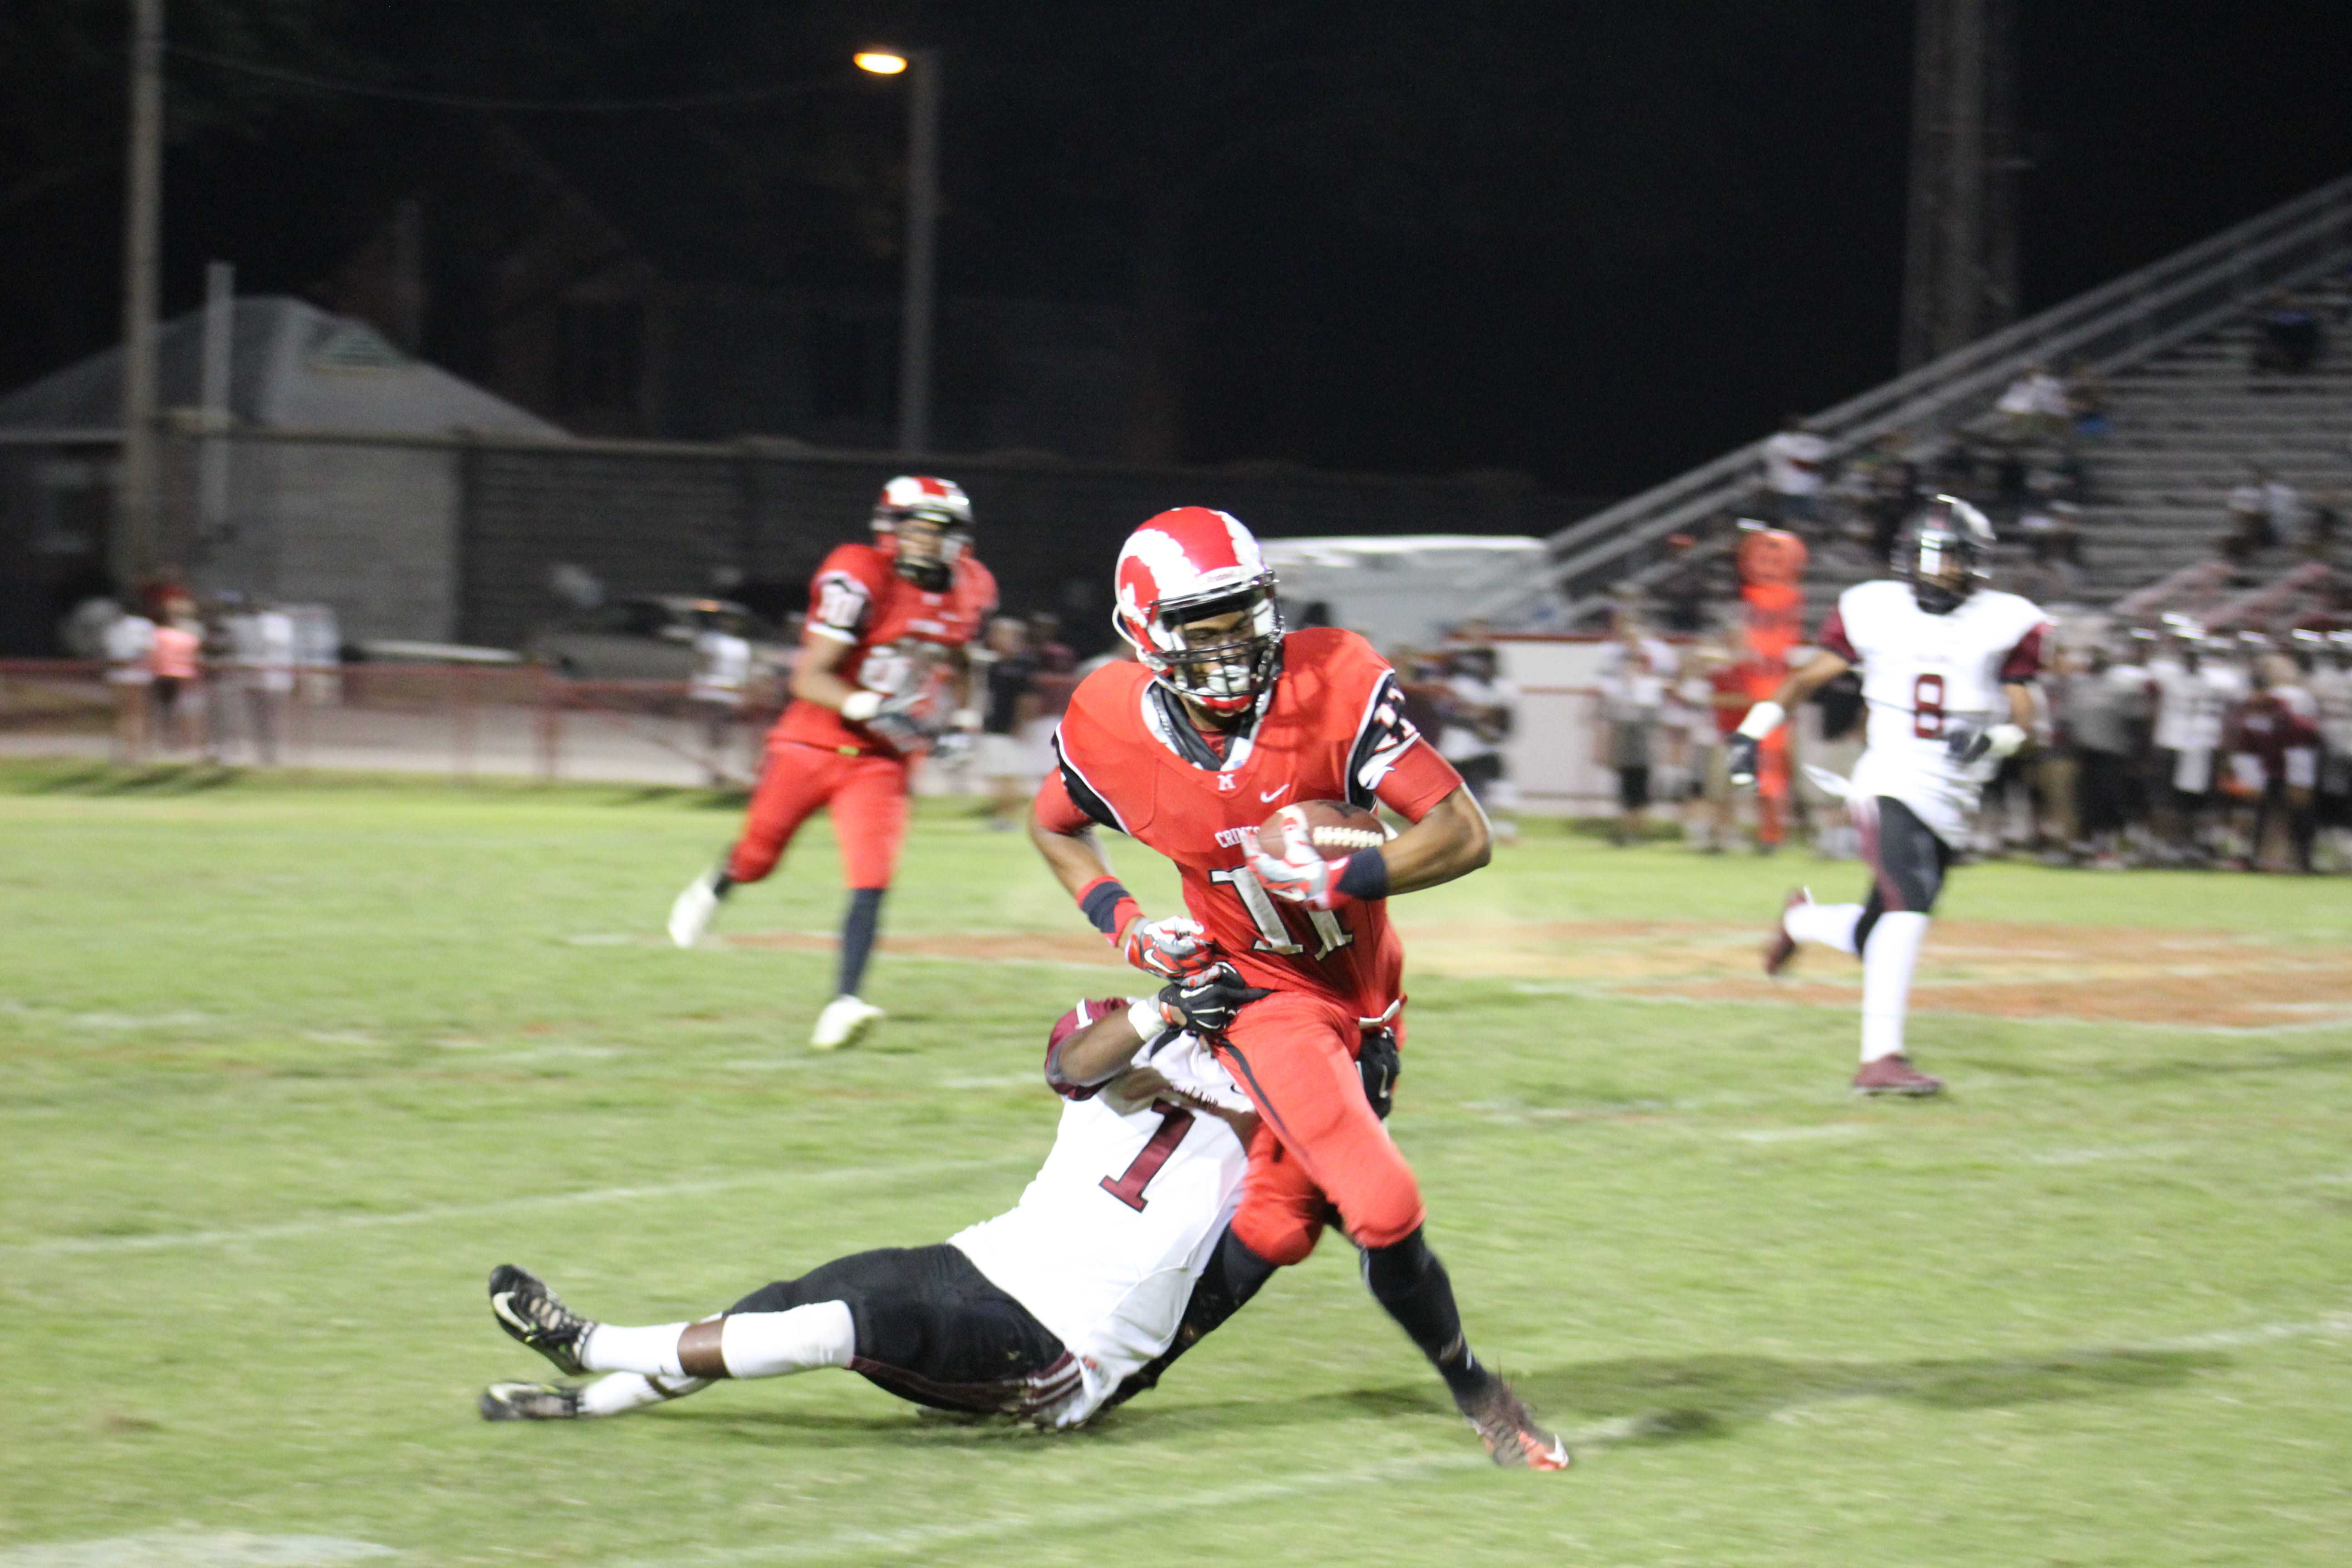 Jailen Carter (11, #11) catches a 46 yard pass on fourth down with 3:15 left in the game. Photo by Kate Hatter.